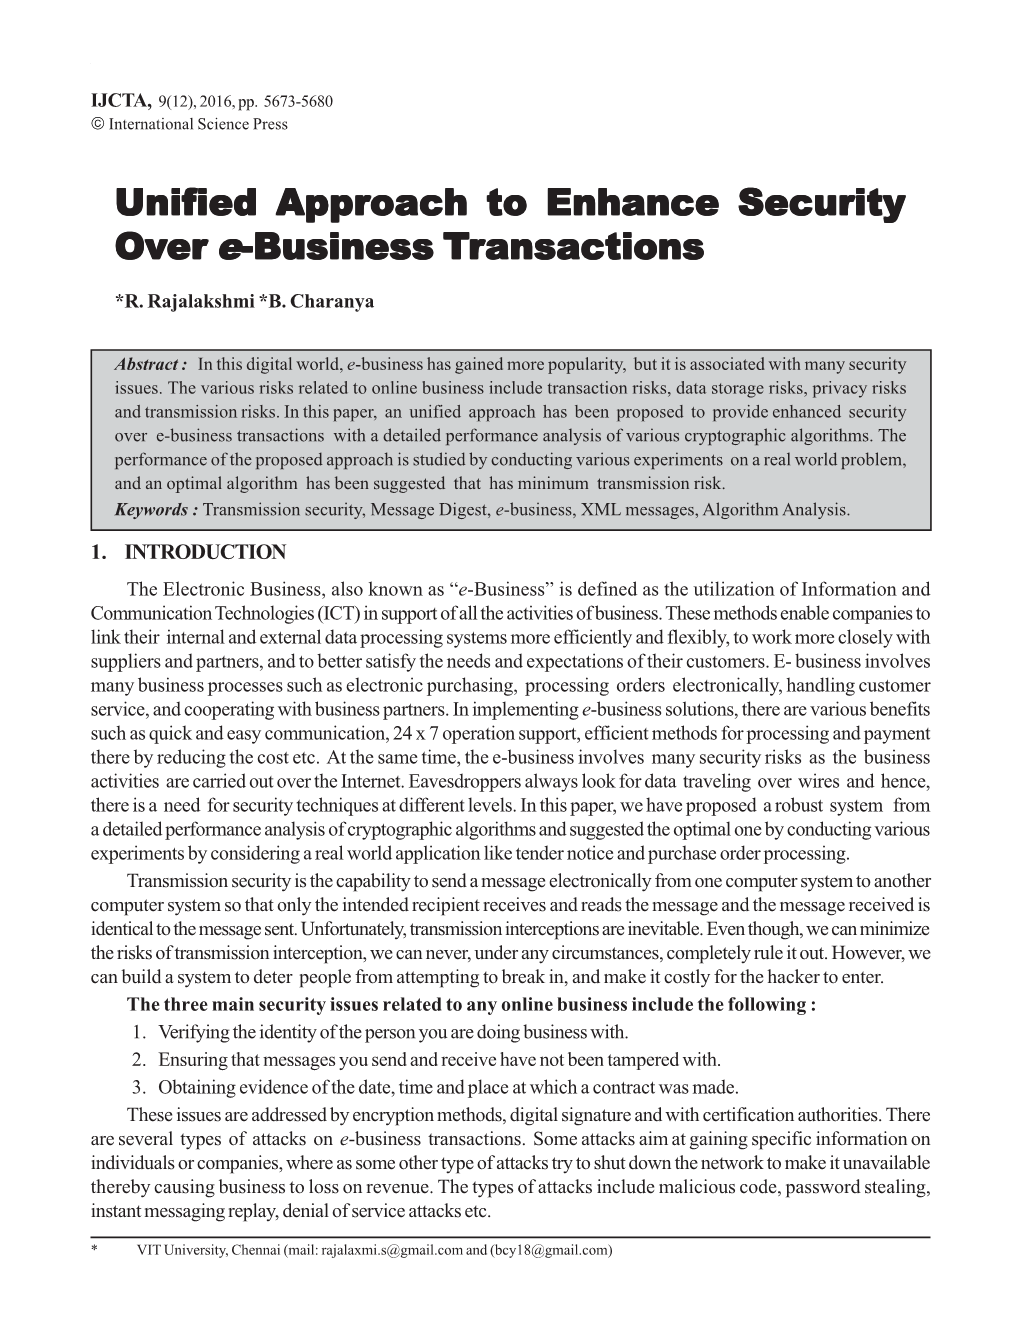 Unified Approach to Enhance Security Over E-Business -Business